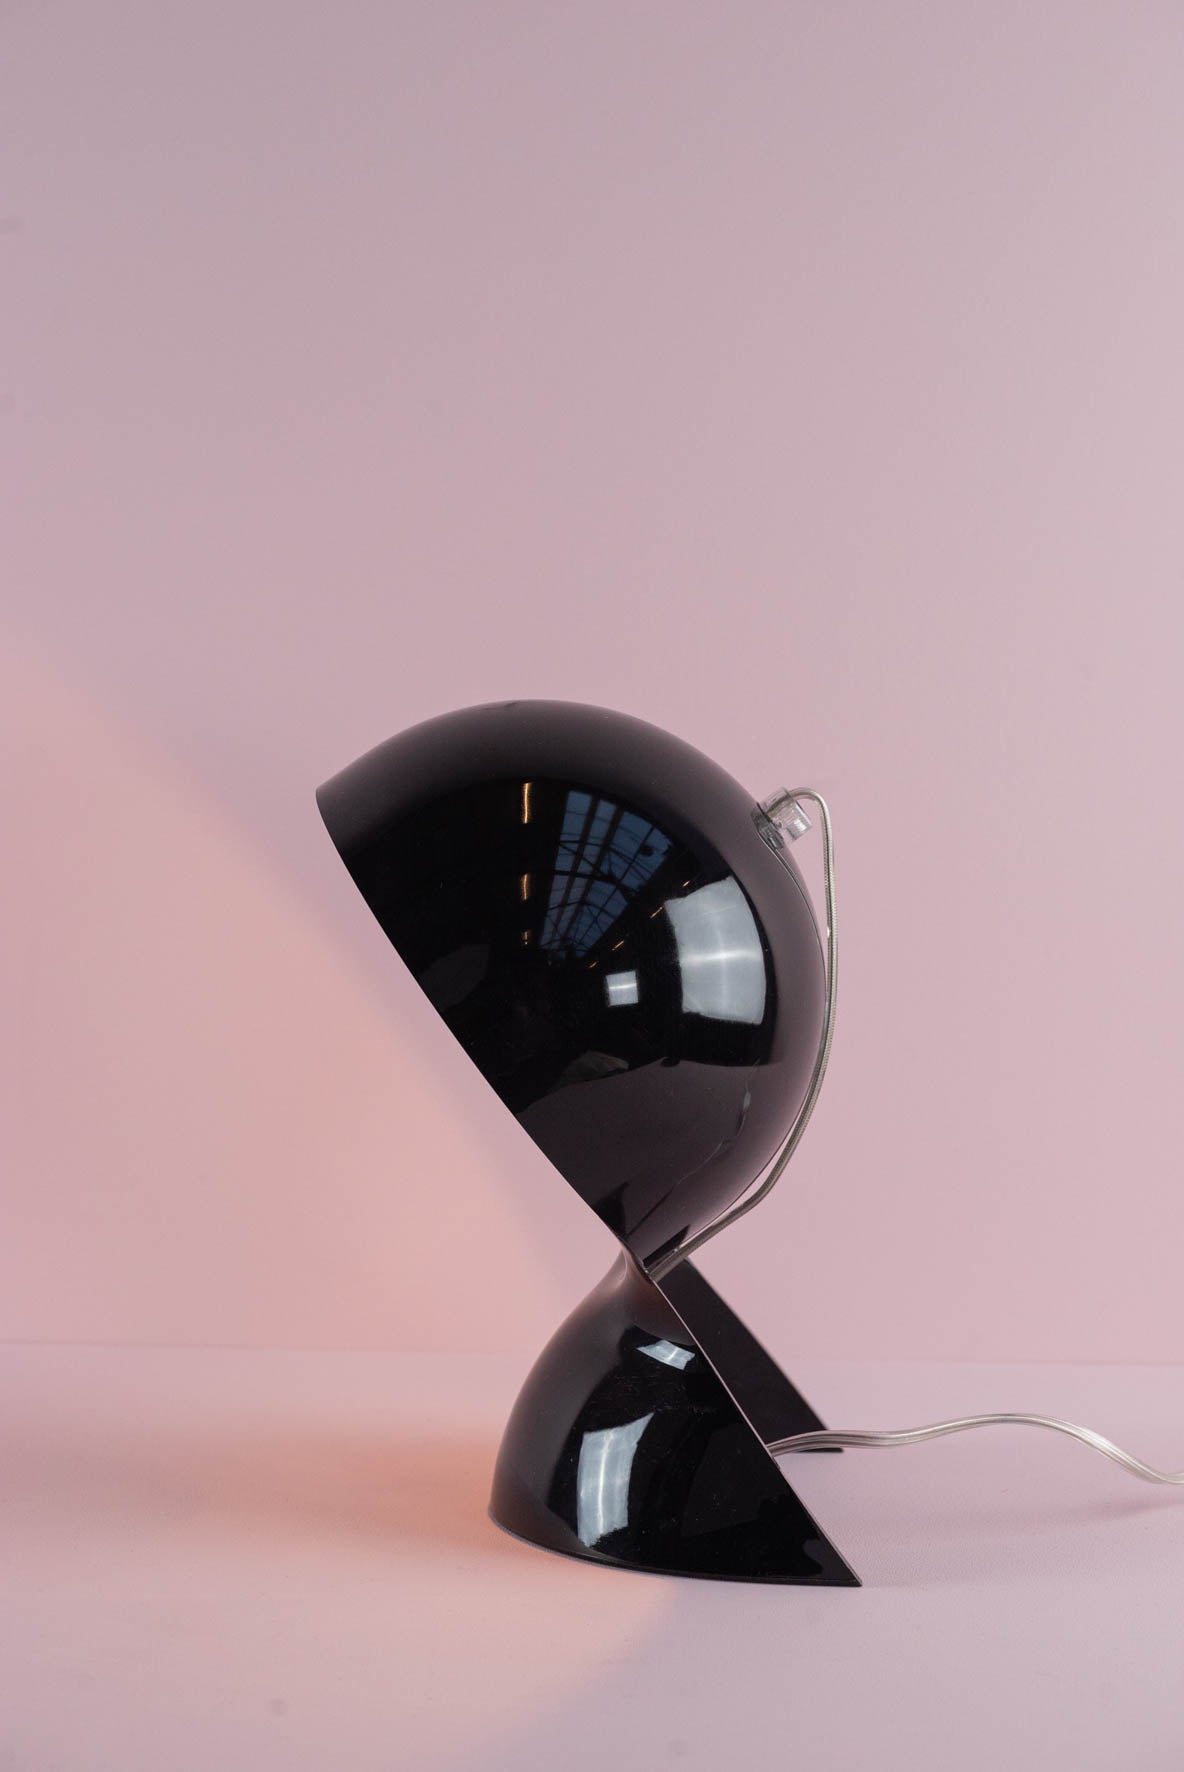 Table lamp Dalu designed by Vico Magistretti produced by Artemide